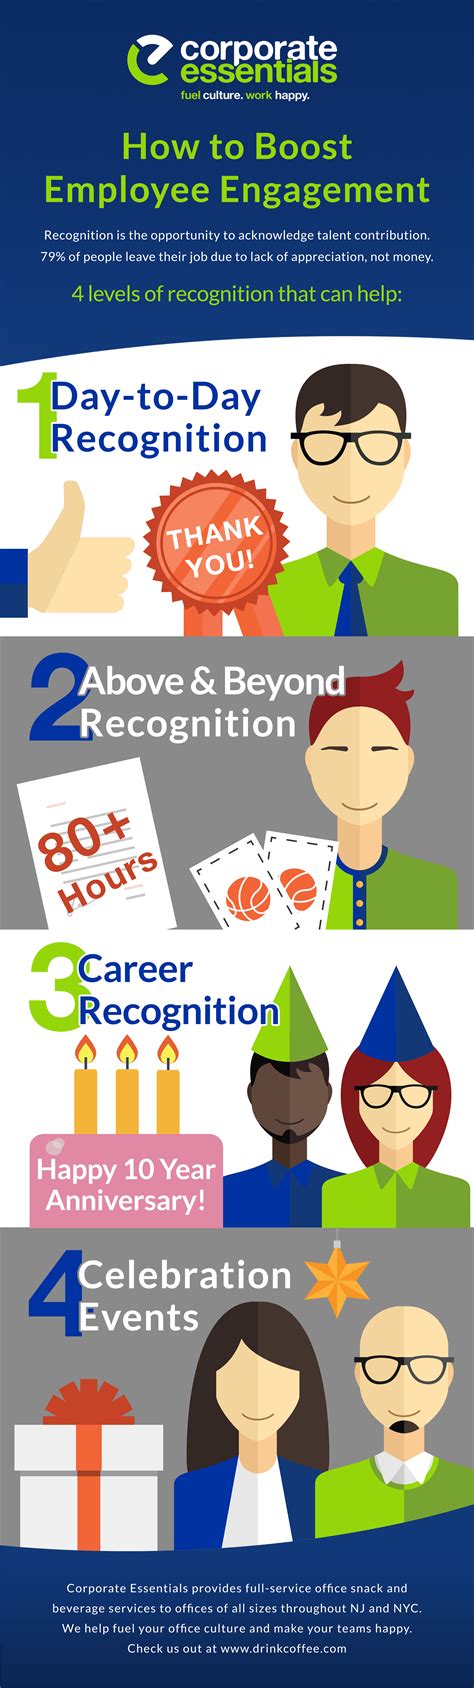 How To Boost Employee Engagement Infographic